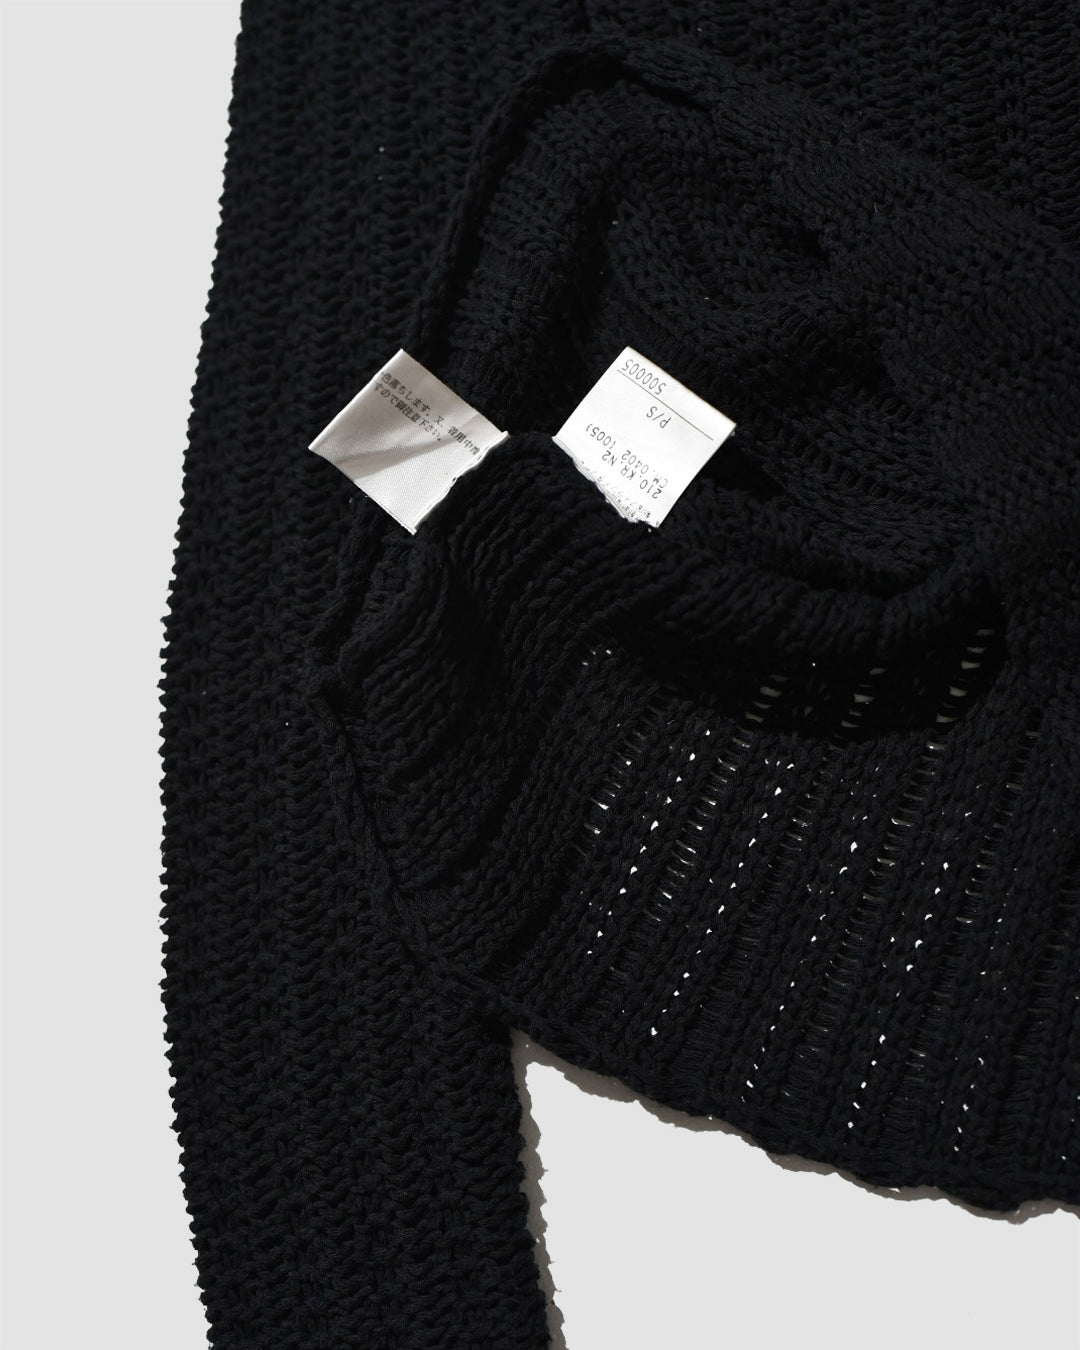 DKNY BLACK KNITTED SWEATER - S/M